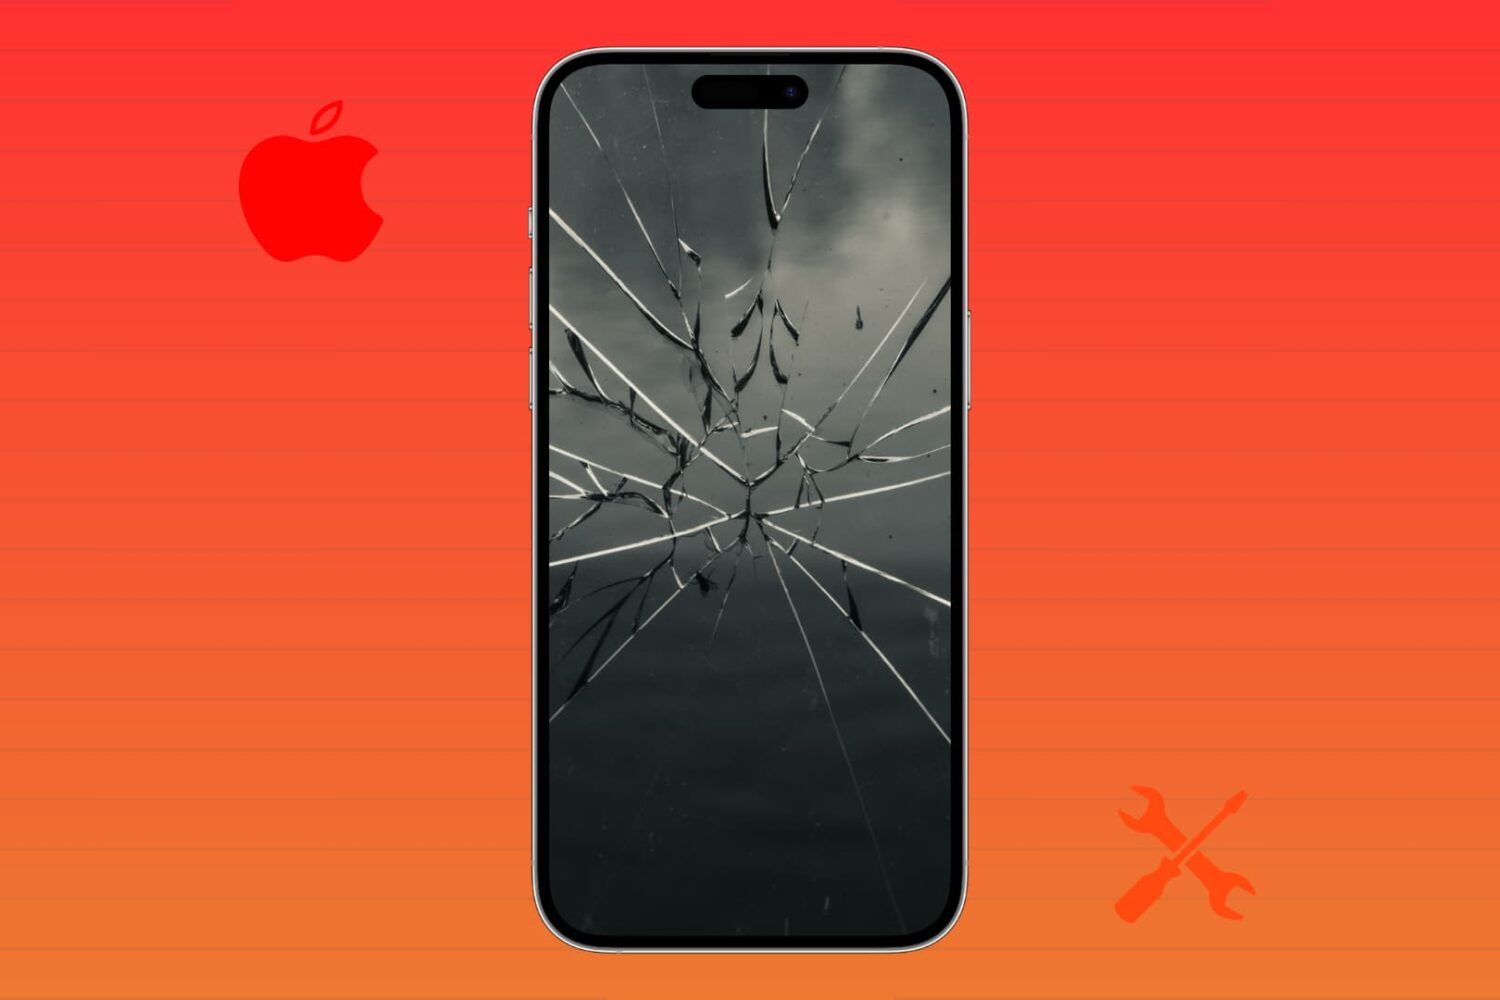 iPhone with broken glass image on screen